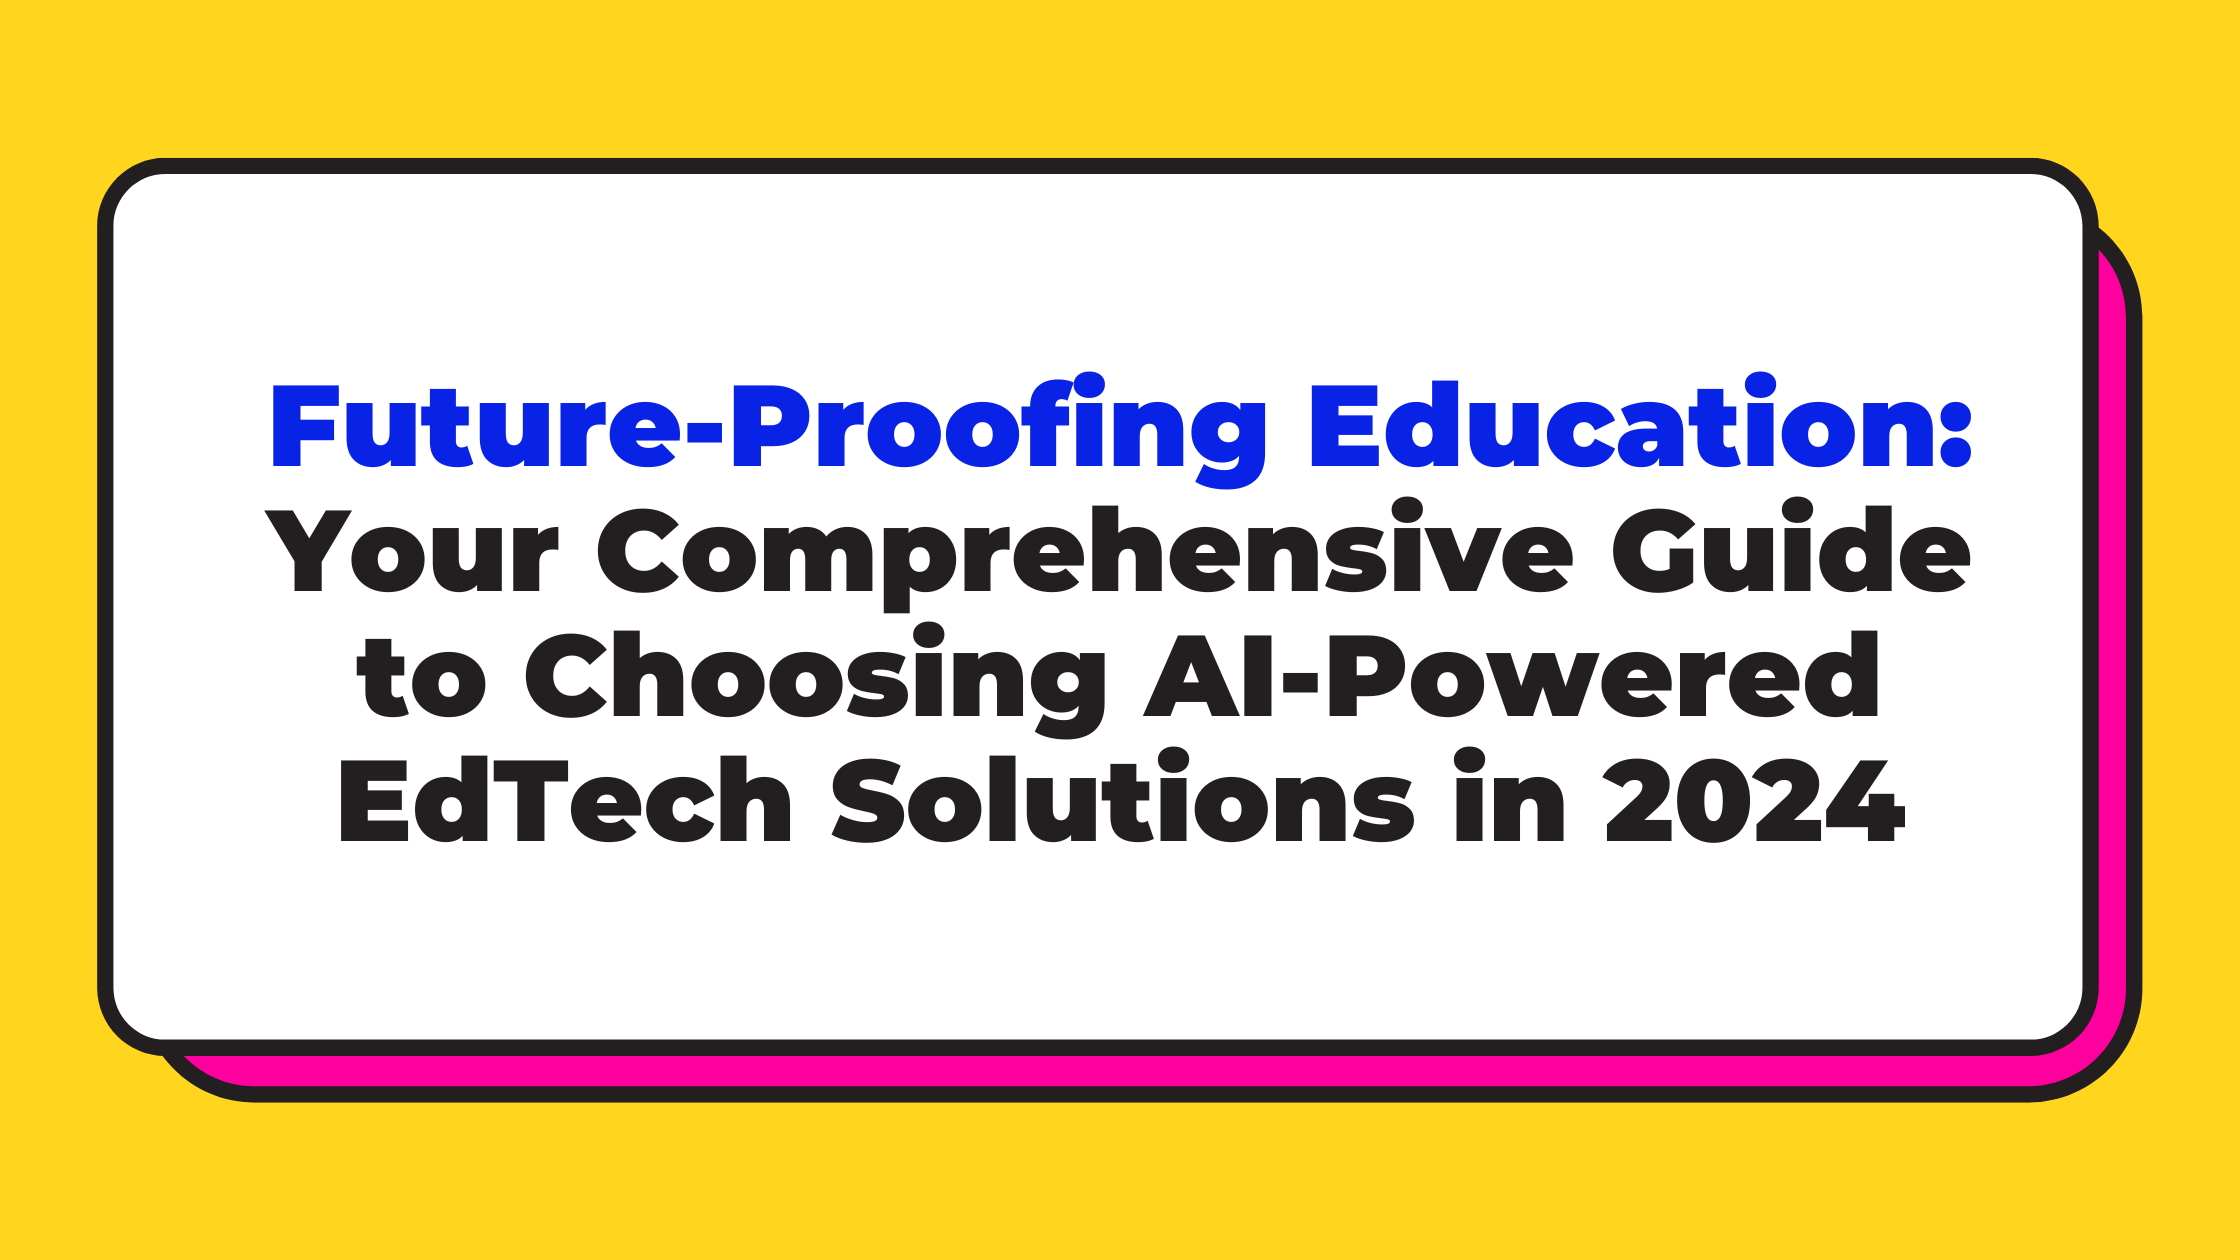 Future-Proofing Education: Your Comprehensive Guide to Choosing AI-Powered EdTech Solutions in 2024